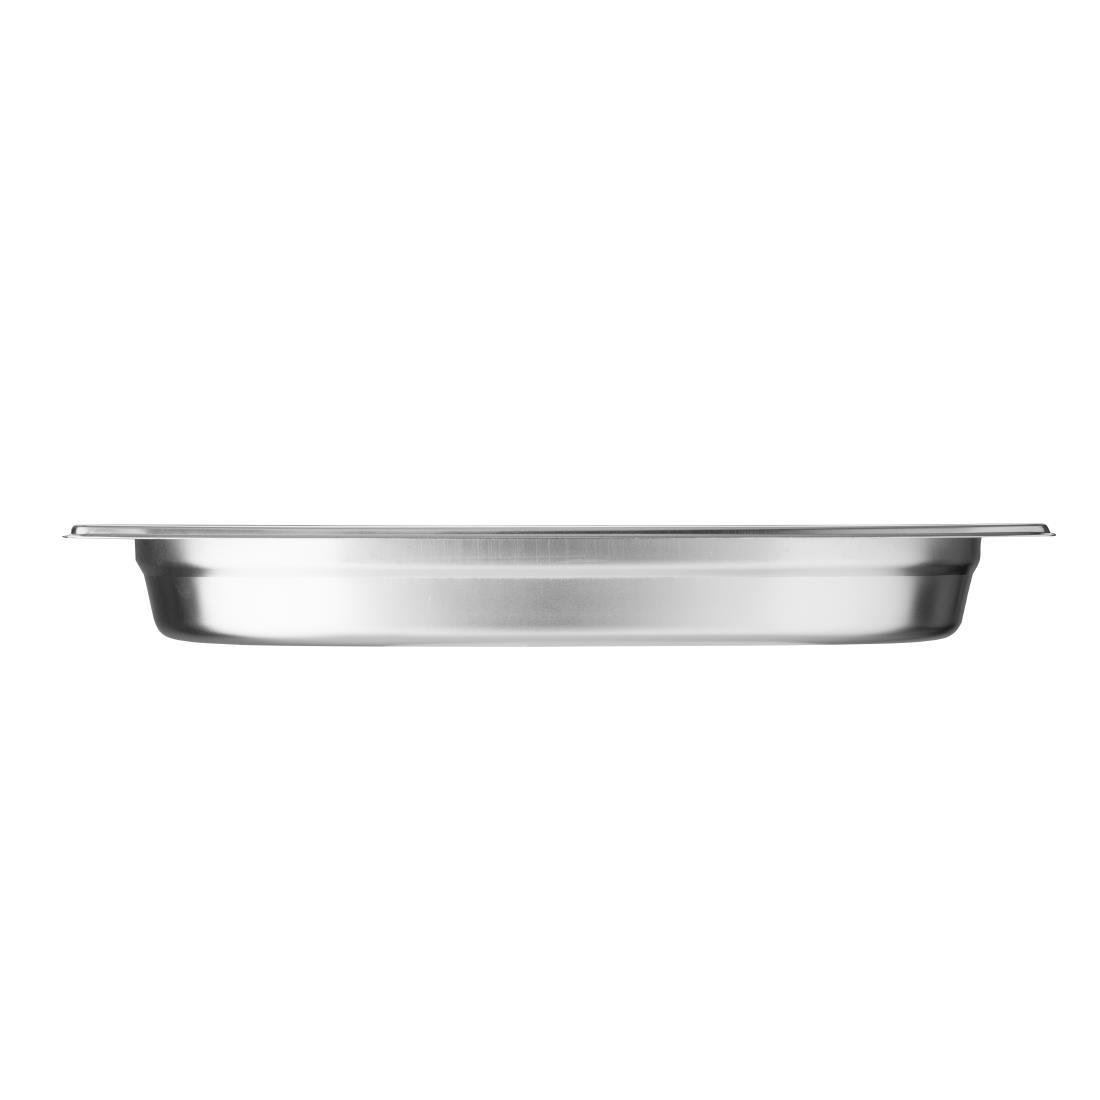 Vogue Stainless Steel 1/2 Gastronorm Pan 40mm - K925  - 6